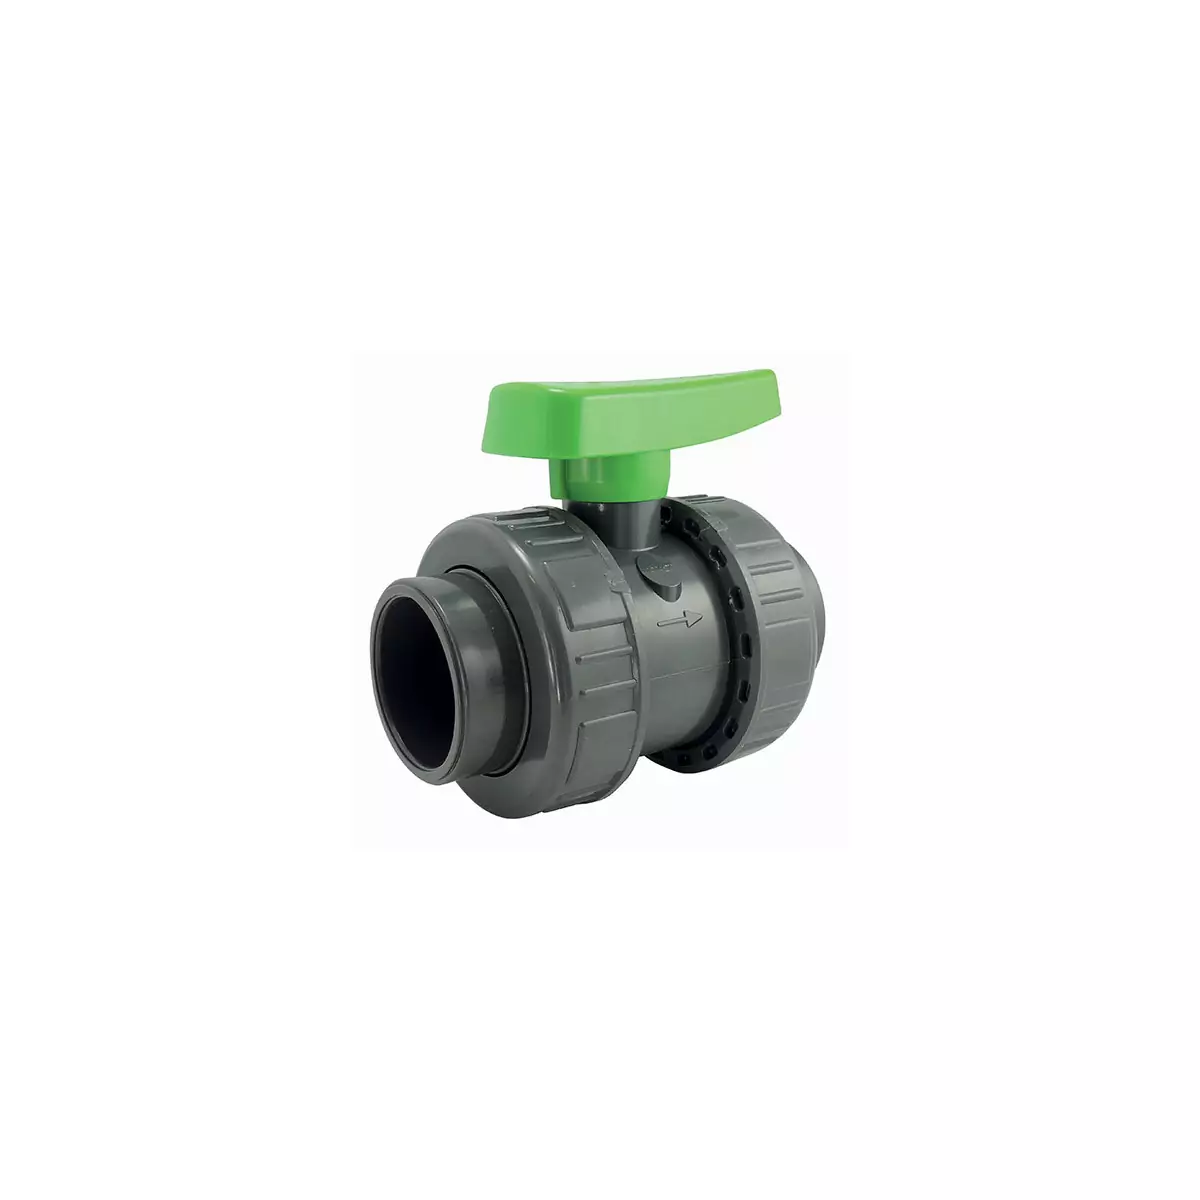 Double Union ball valve - irrigation series - female connection to stick